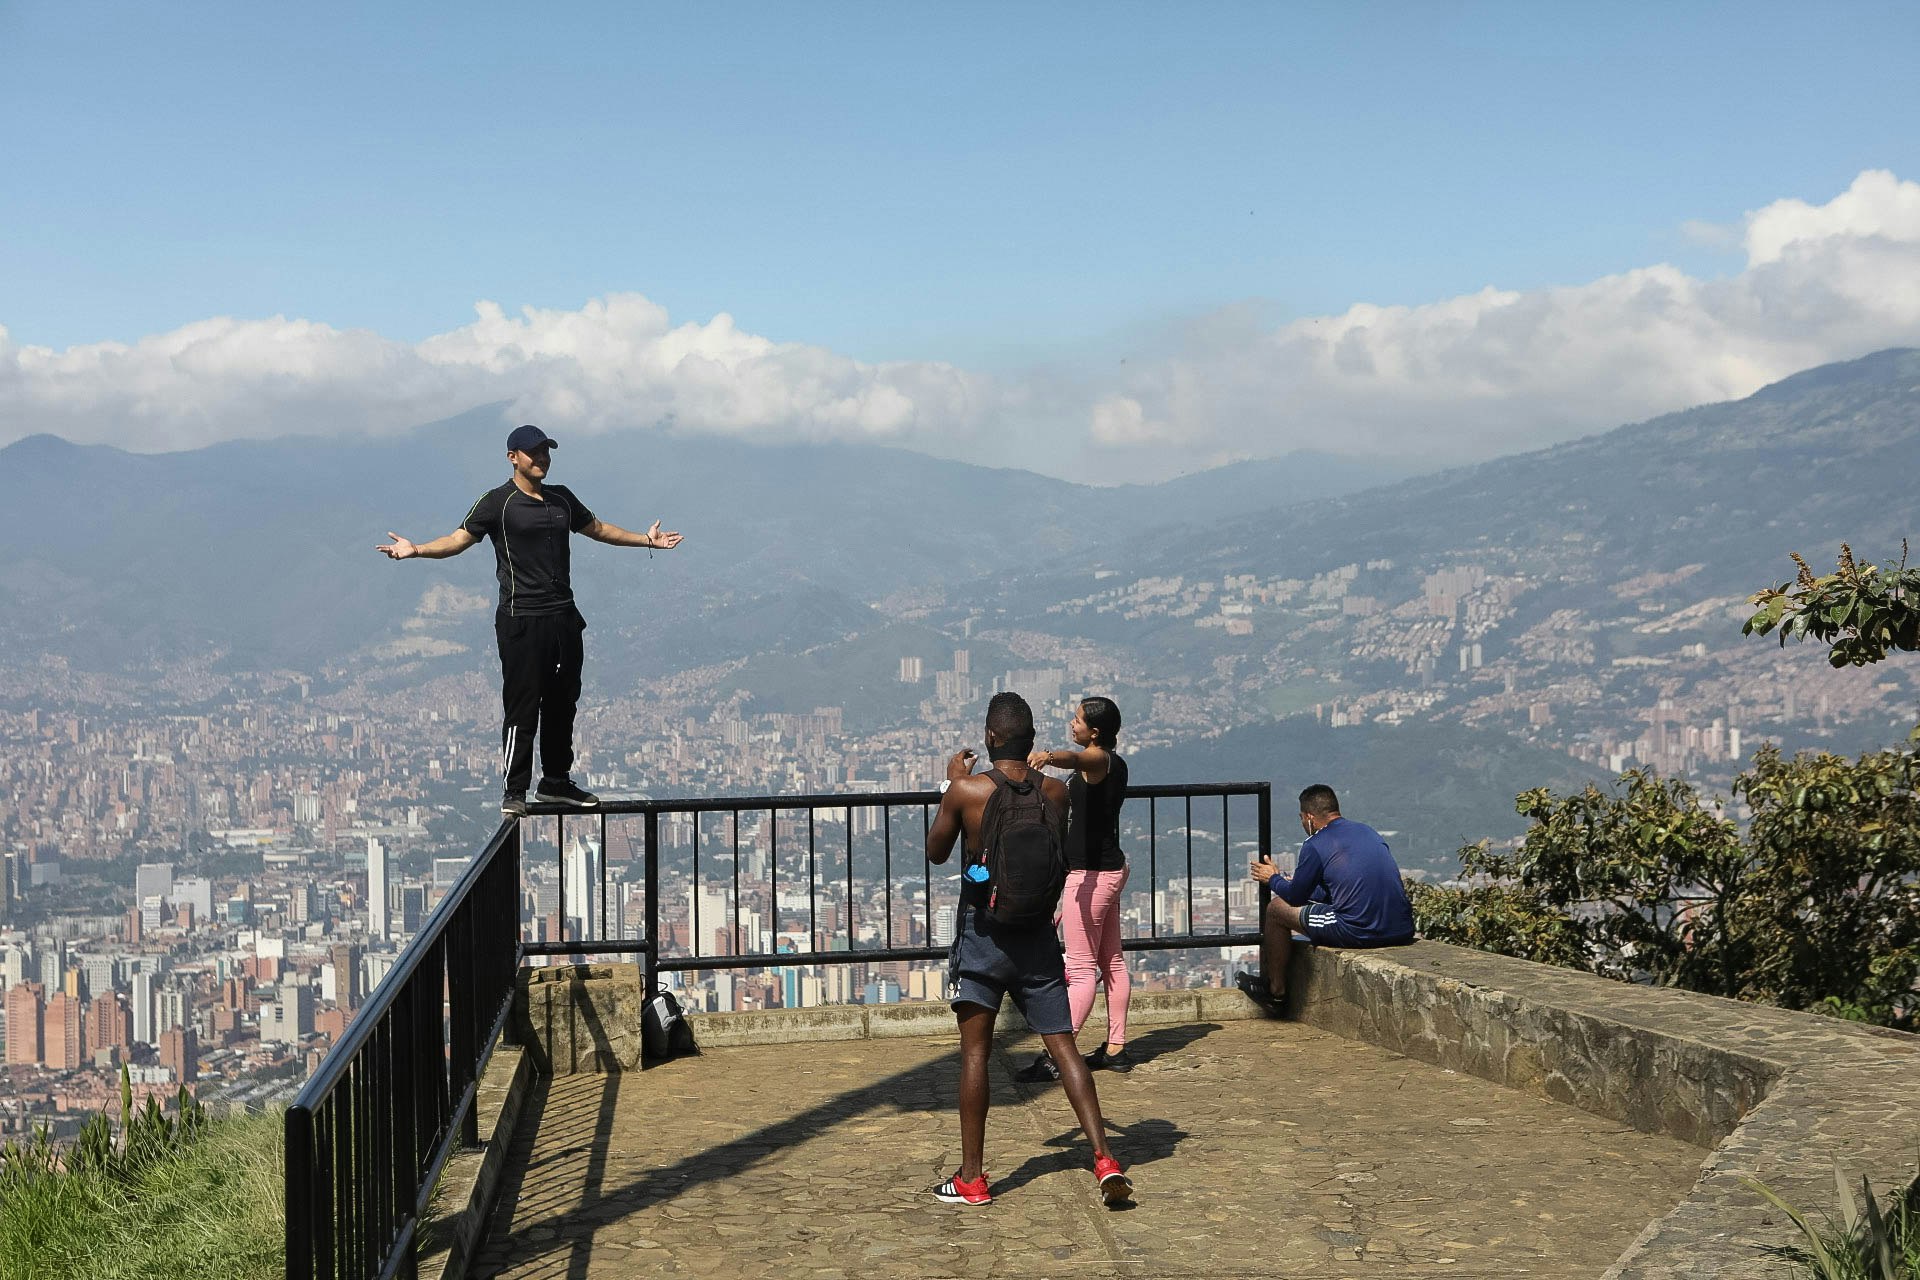 A man in black track pants and a athleisure shirt and black ball cap poses by standing on the corner of a railing at an overlook that offers panoramic views of Medellin below.jpg